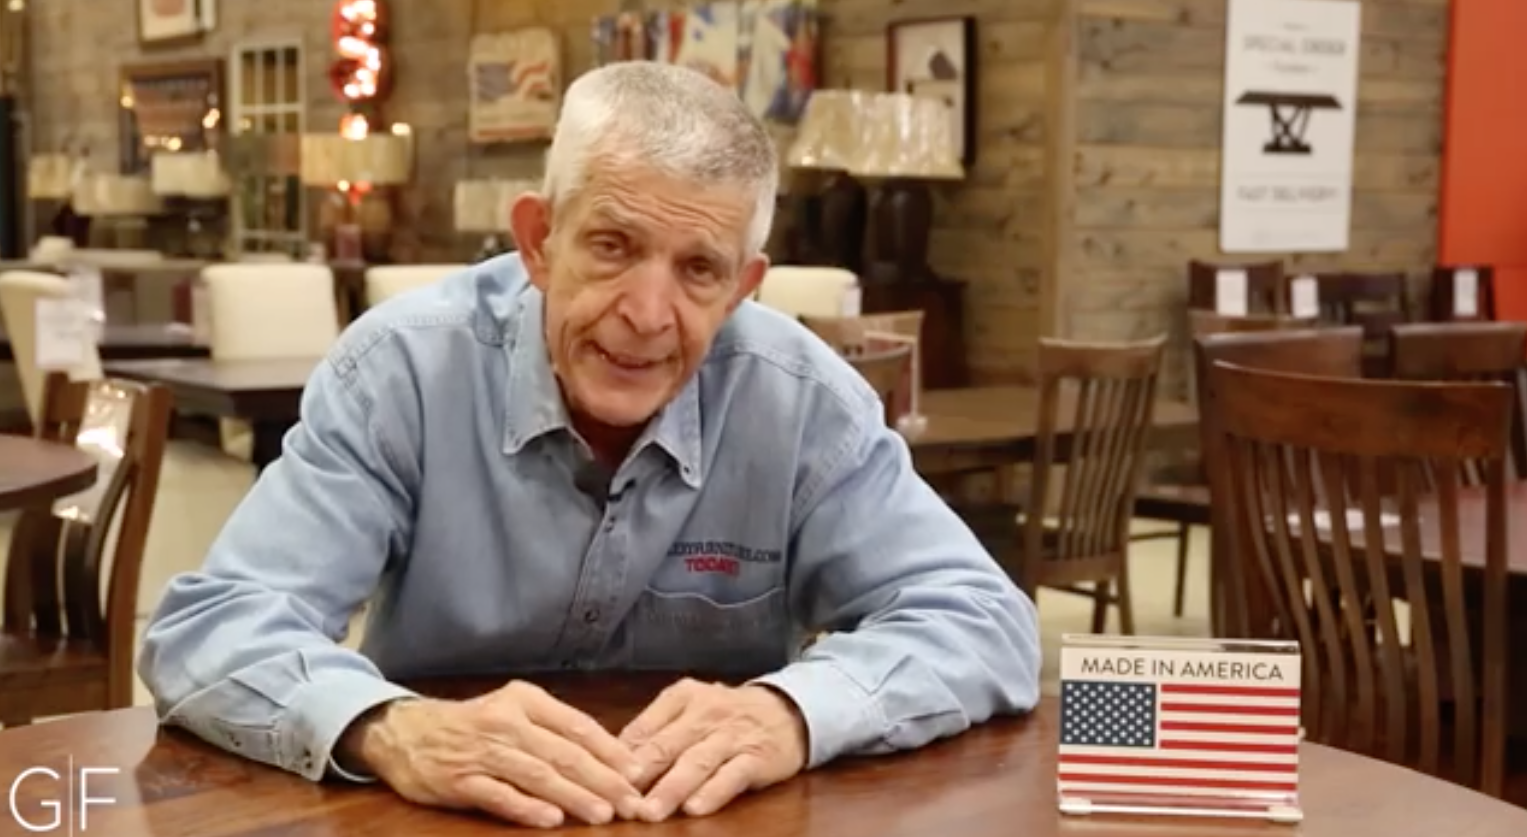 Mattress Mack provides Houston families in need with clothes